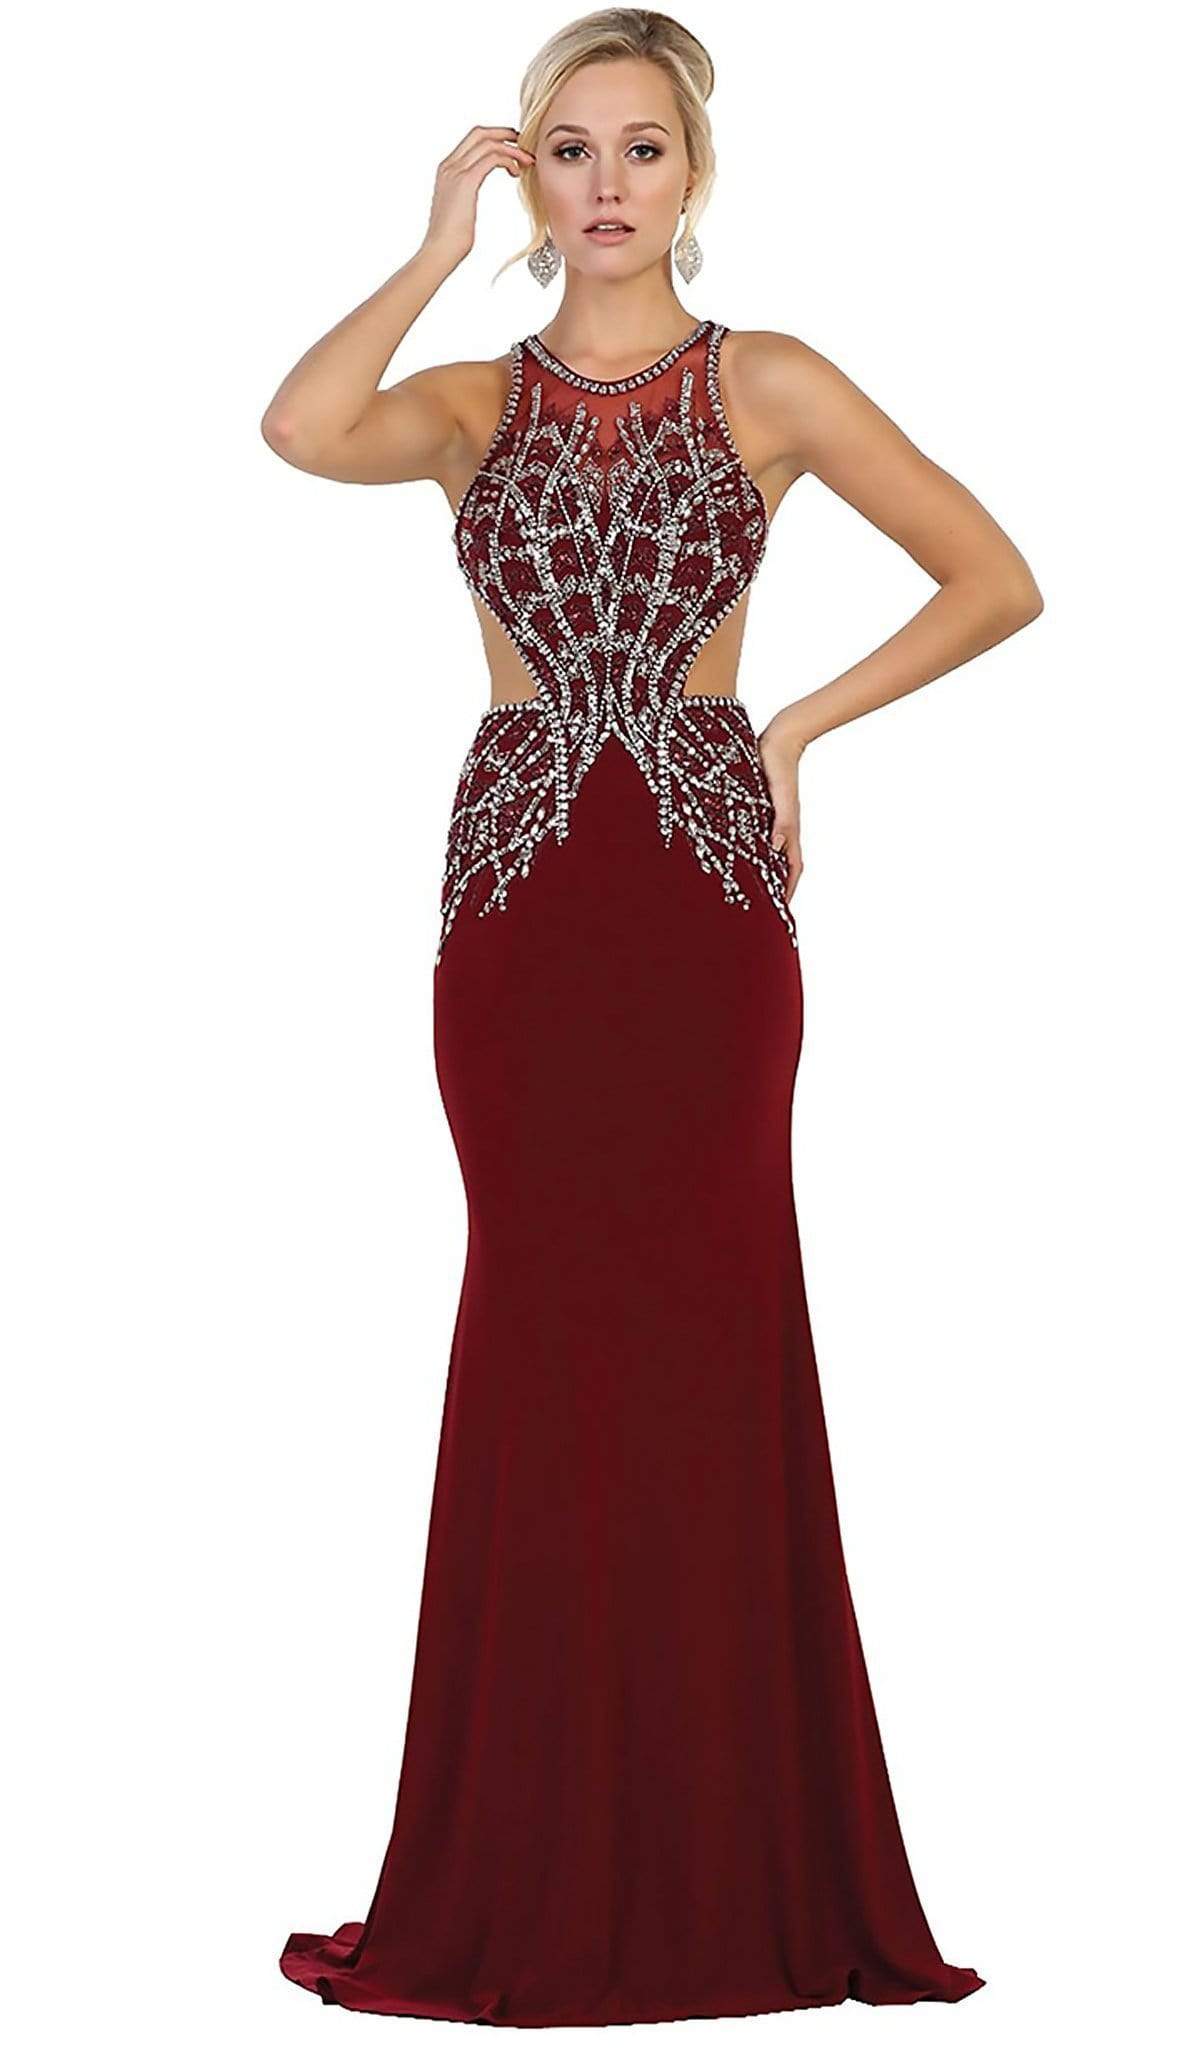 May Queen - Bejeweled Illusion Halter Sheath Evening Dress Special Occasion Dress 2 / Burgundy